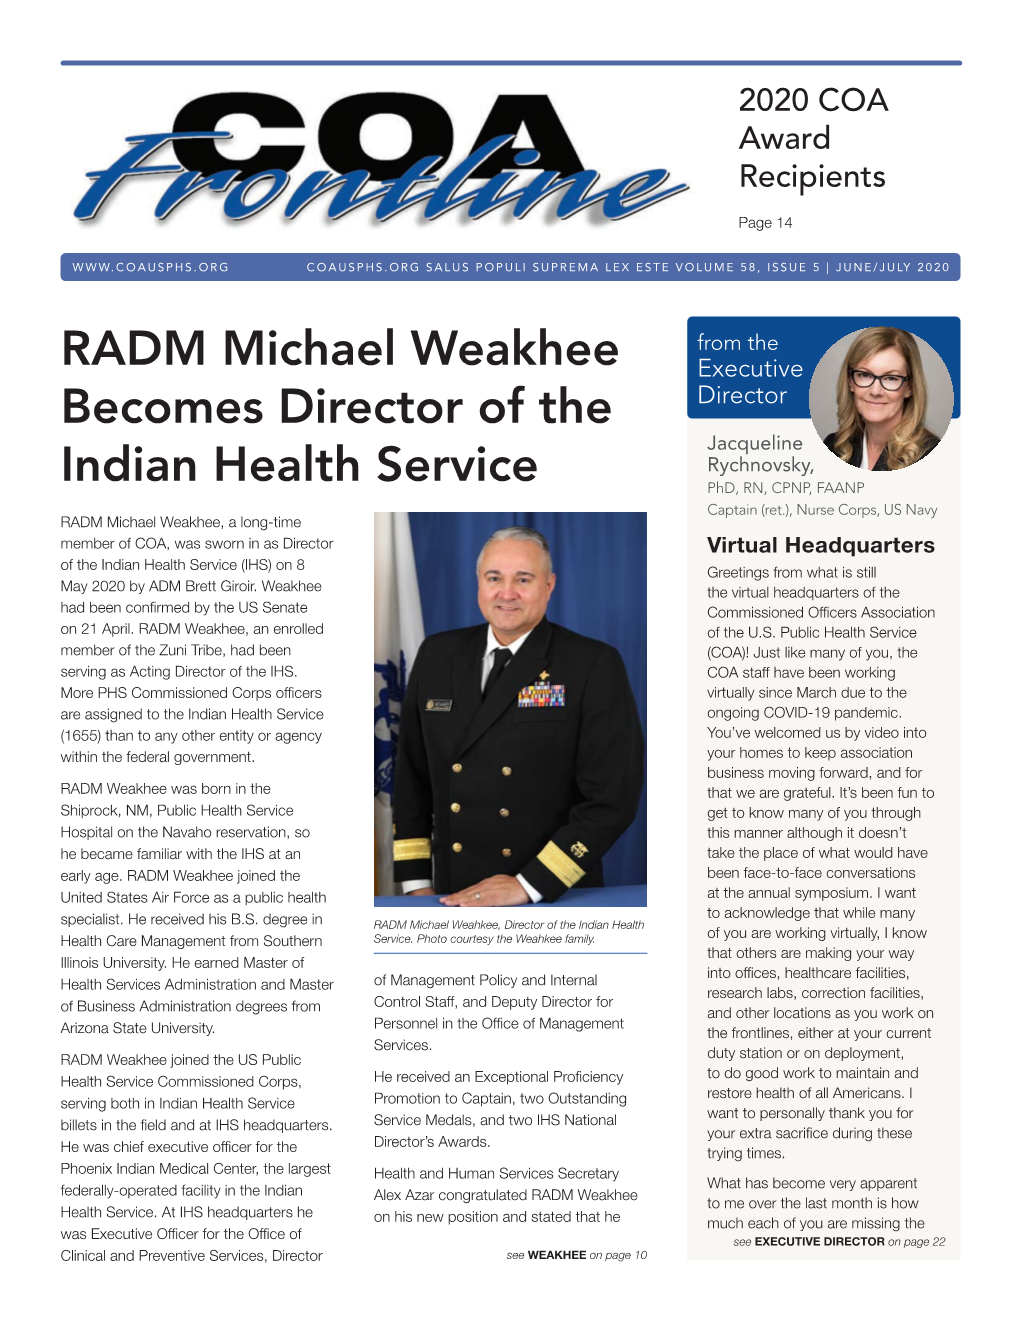 RADM Michael Weakhee Becomes Director of the Indian Health Service